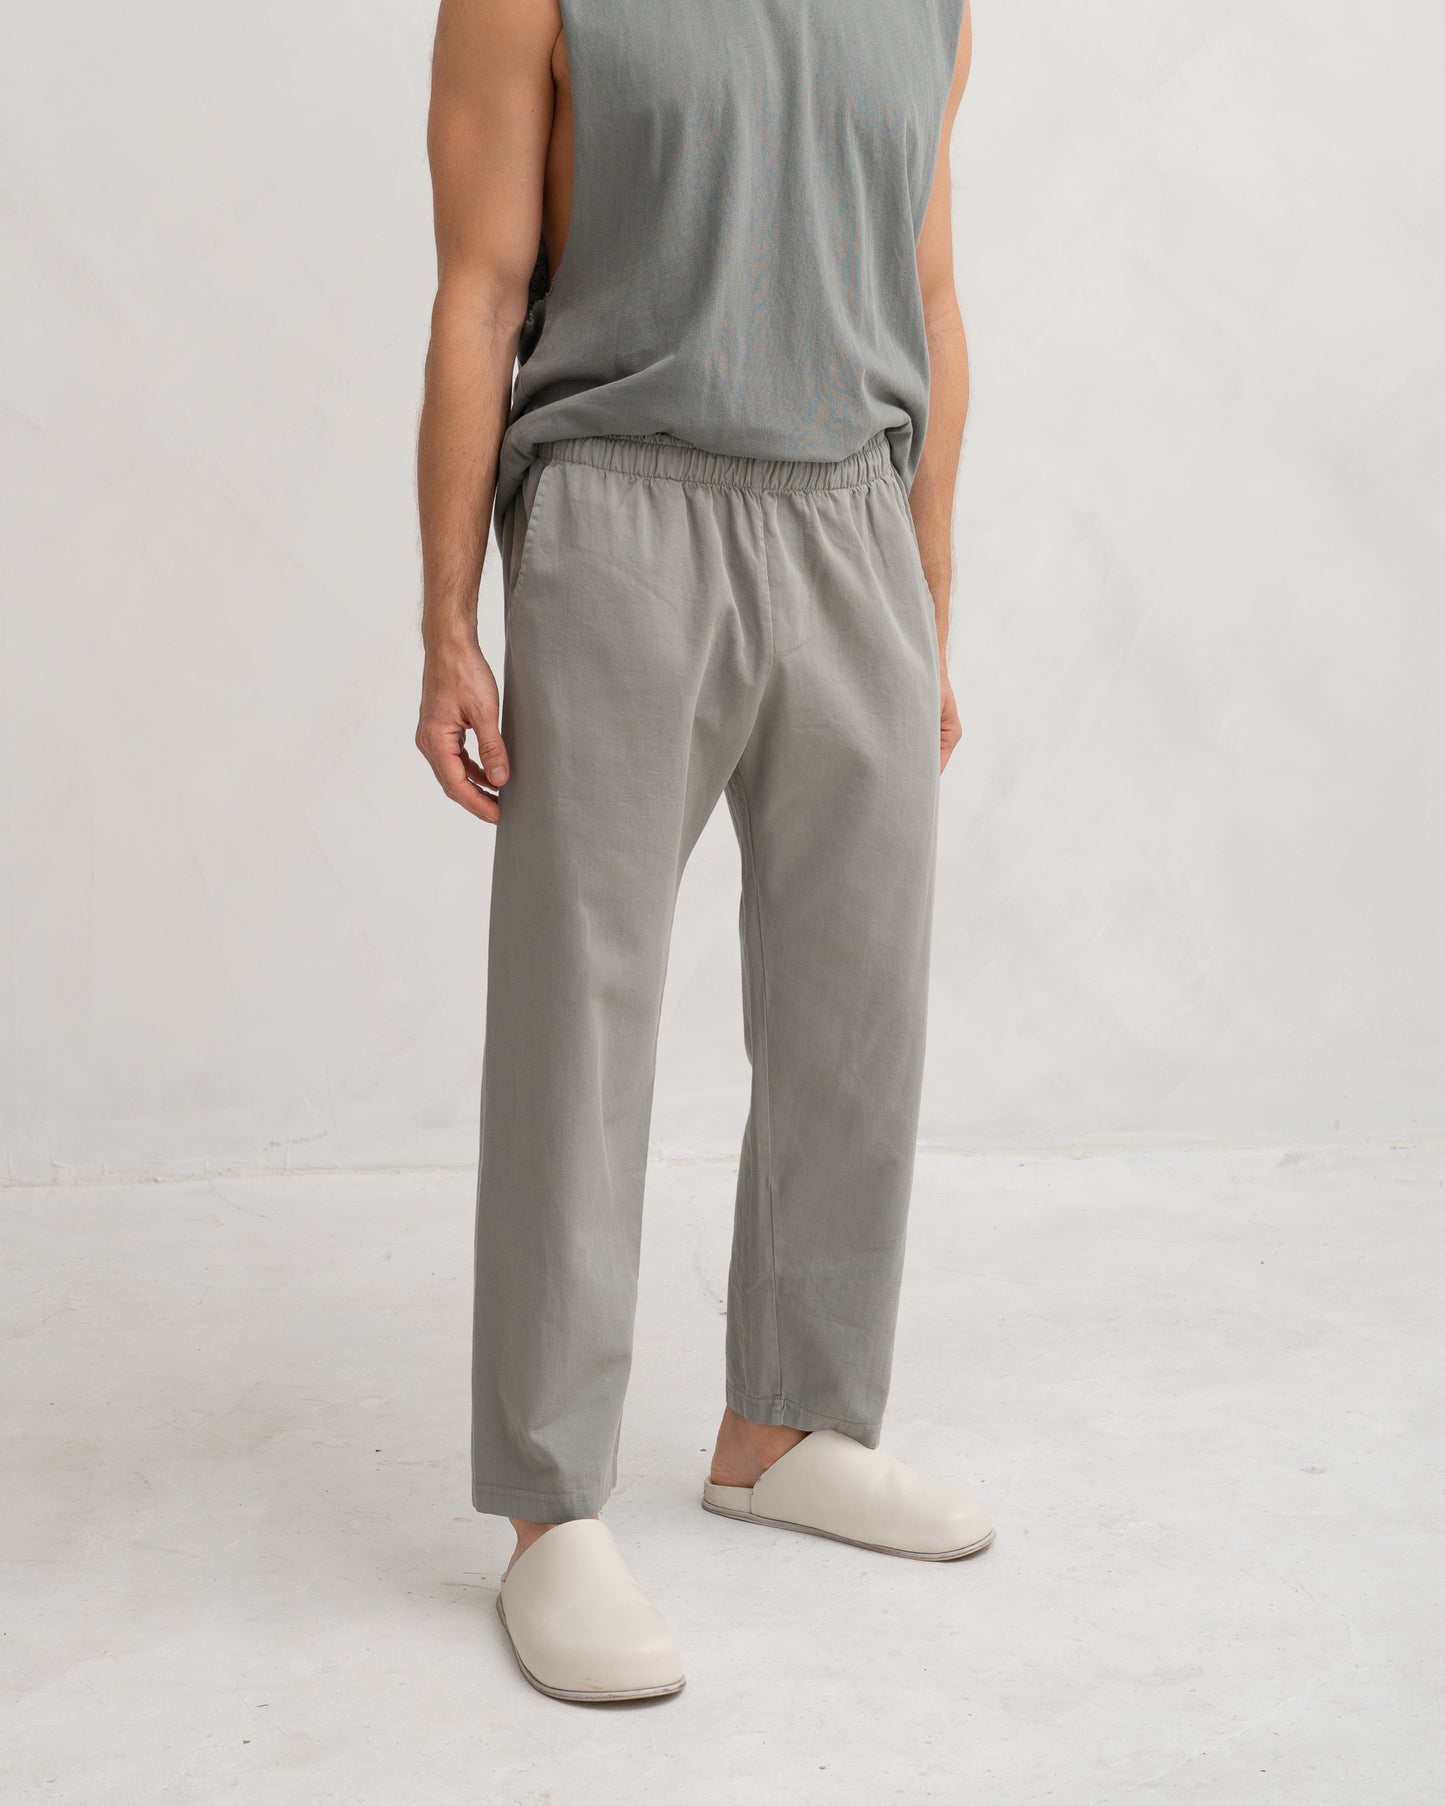 Cotton Twill Pant - Mulled Basil